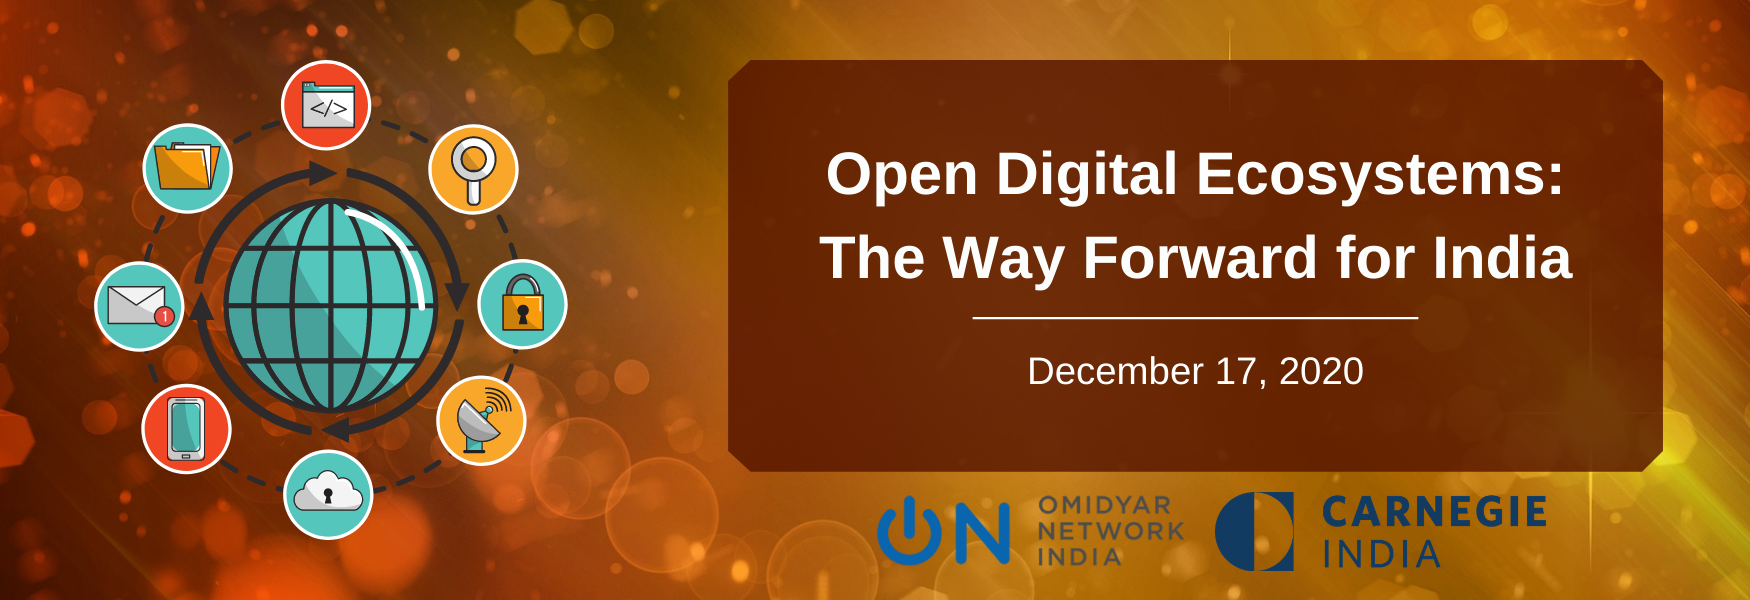 Open Digital Ecosystems: The Way Forward for India